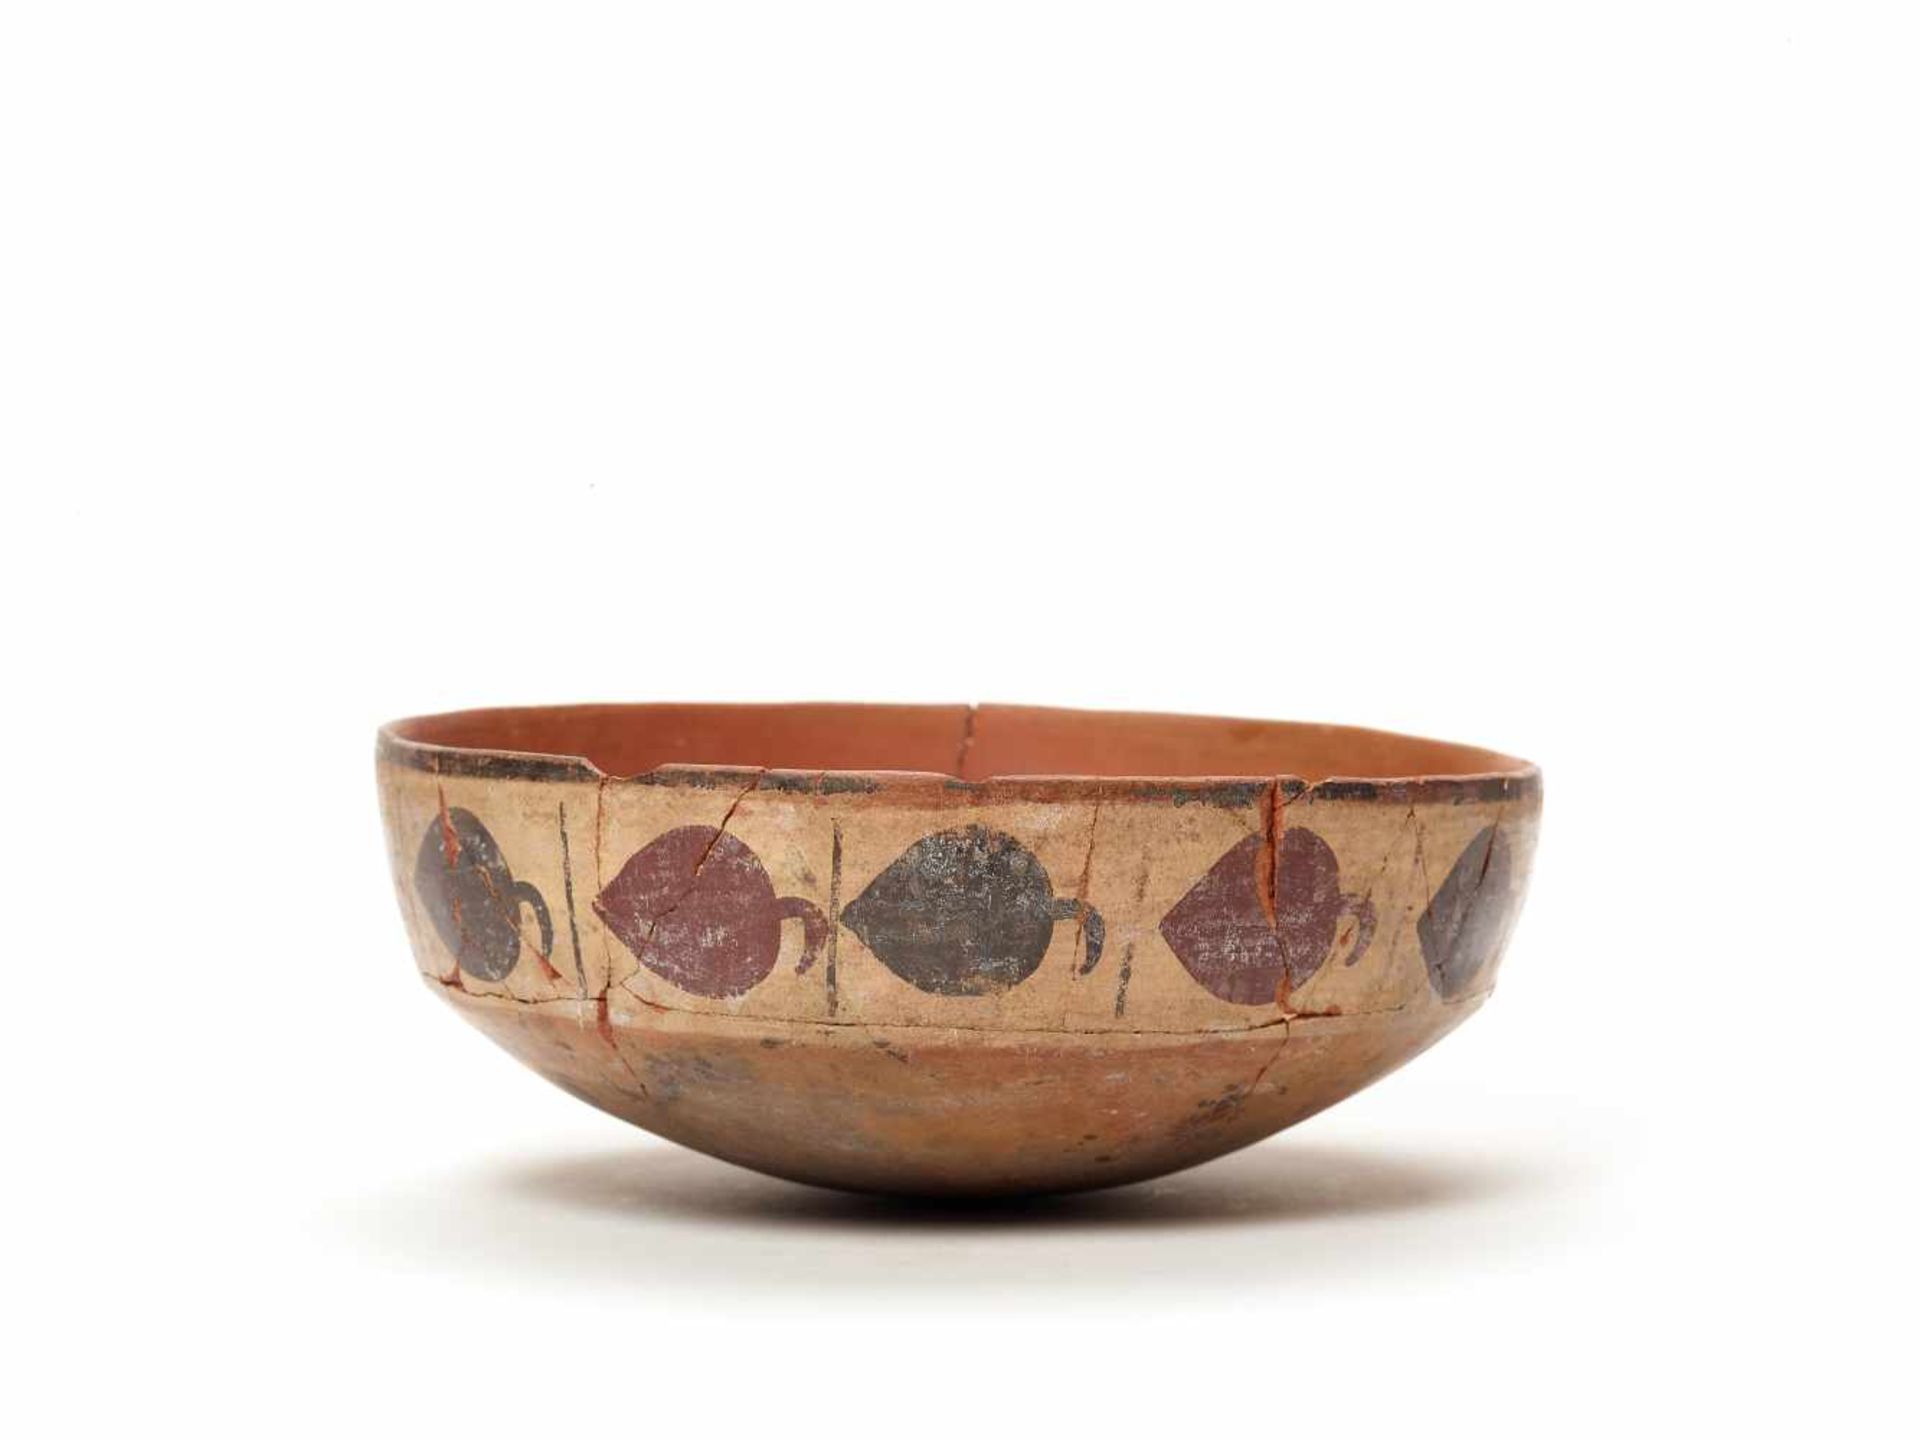 BOWL WITH BAND DECORATION - NAZCA, PERU, C. 300-600 ADPainted clayNazca, Peru, c. 300-600 ADArched - Image 2 of 5